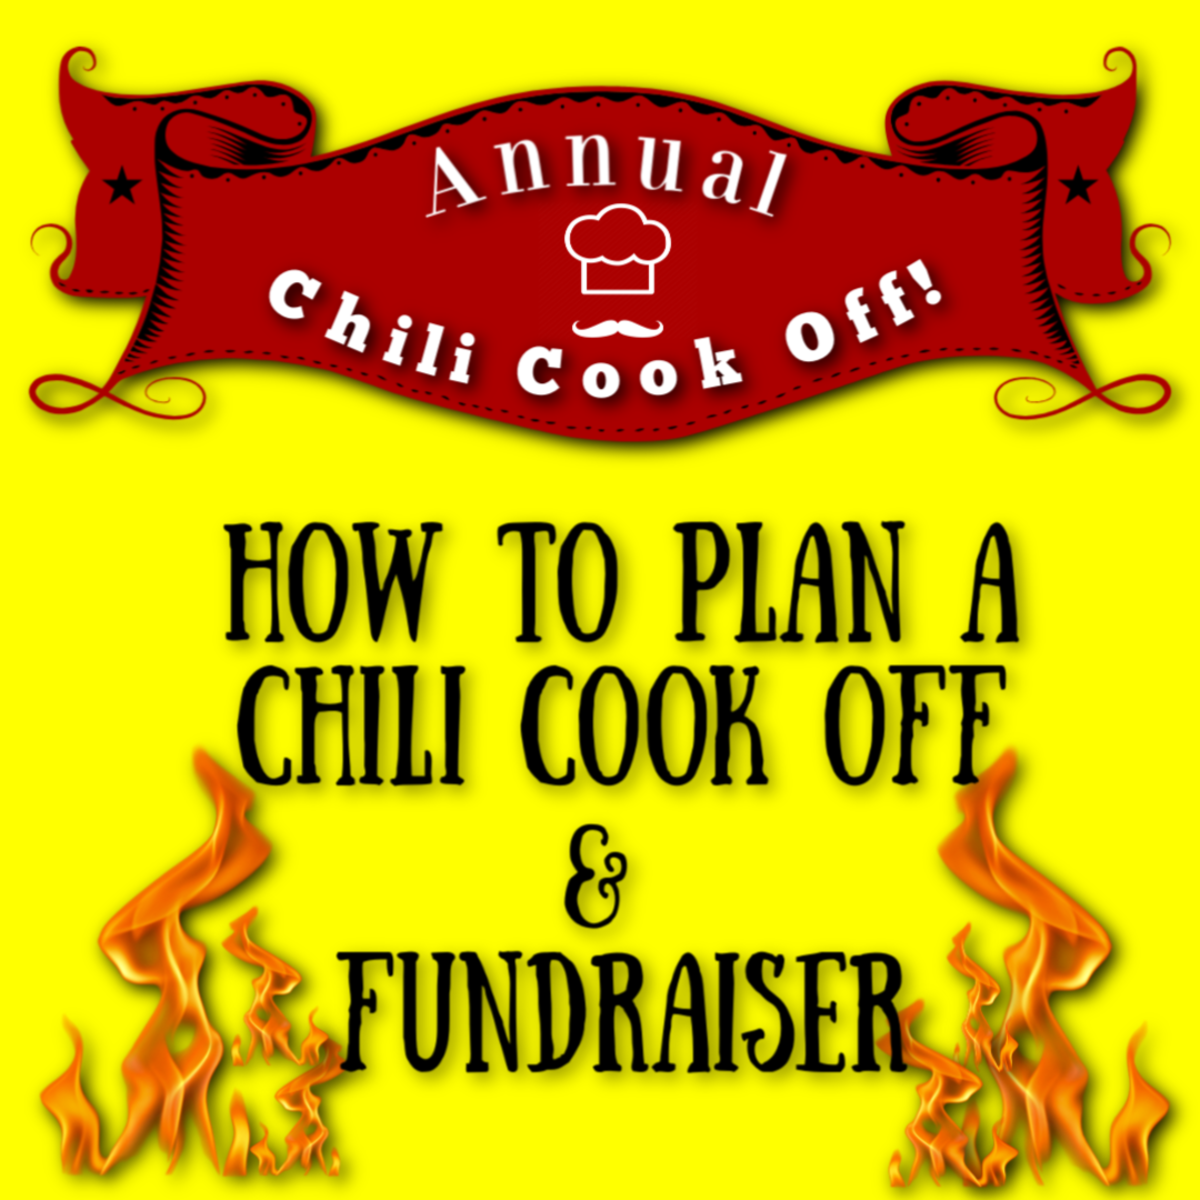 Hosting a chili cook-off could help you meet your fundraising goals.